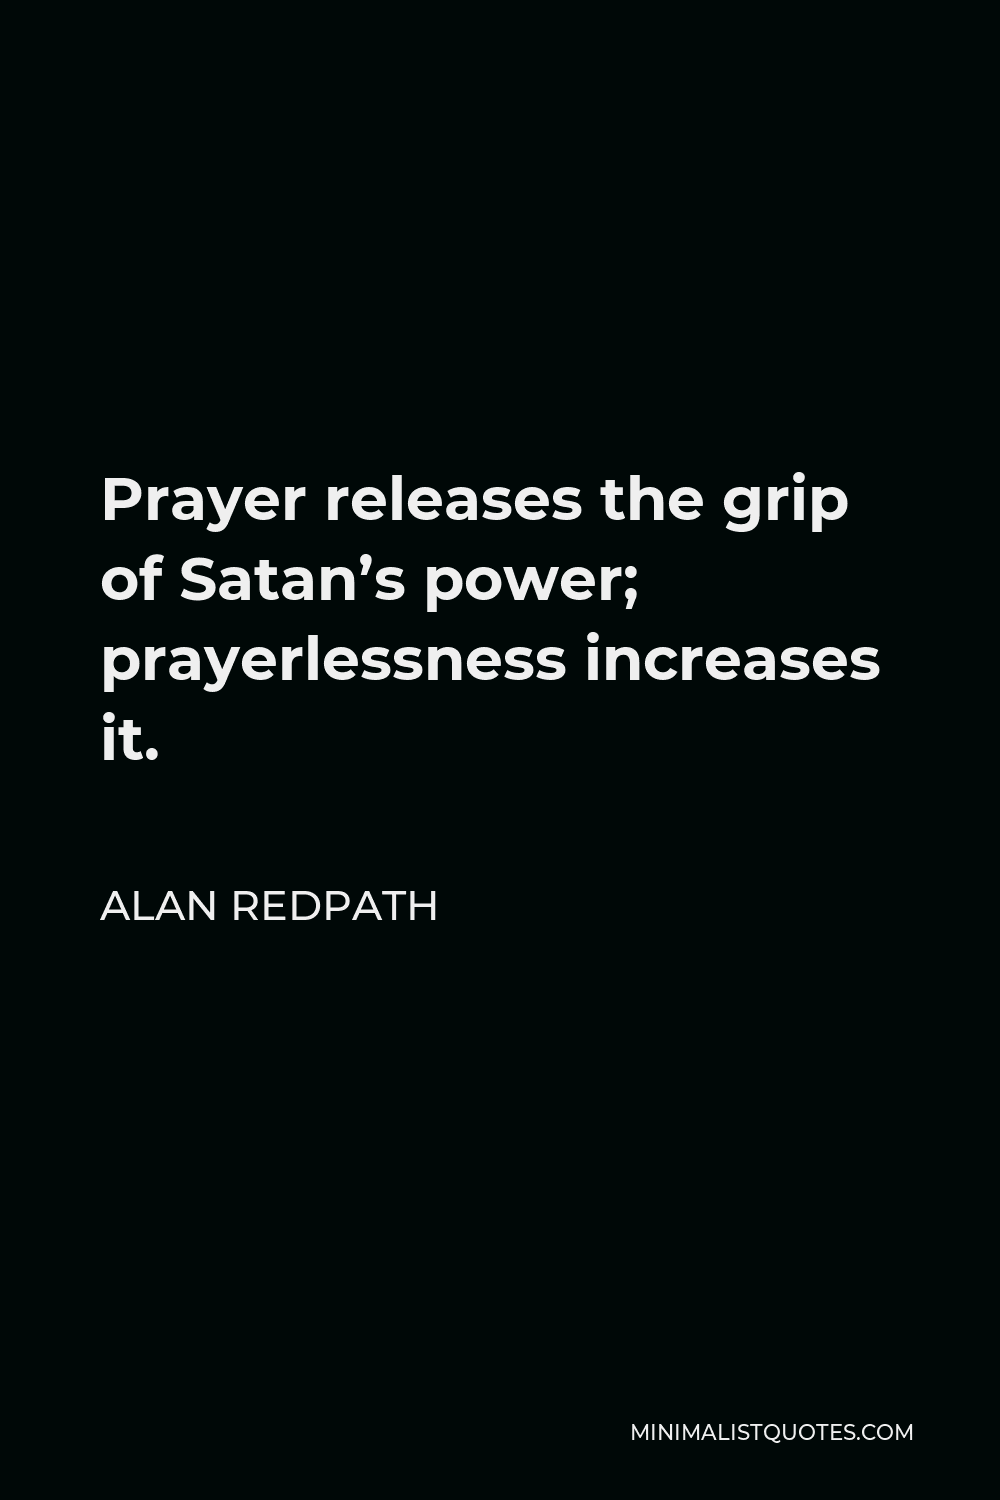 Alan Redpath Quote - Prayer releases the grip of Satan’s power; prayerlessness increases it.